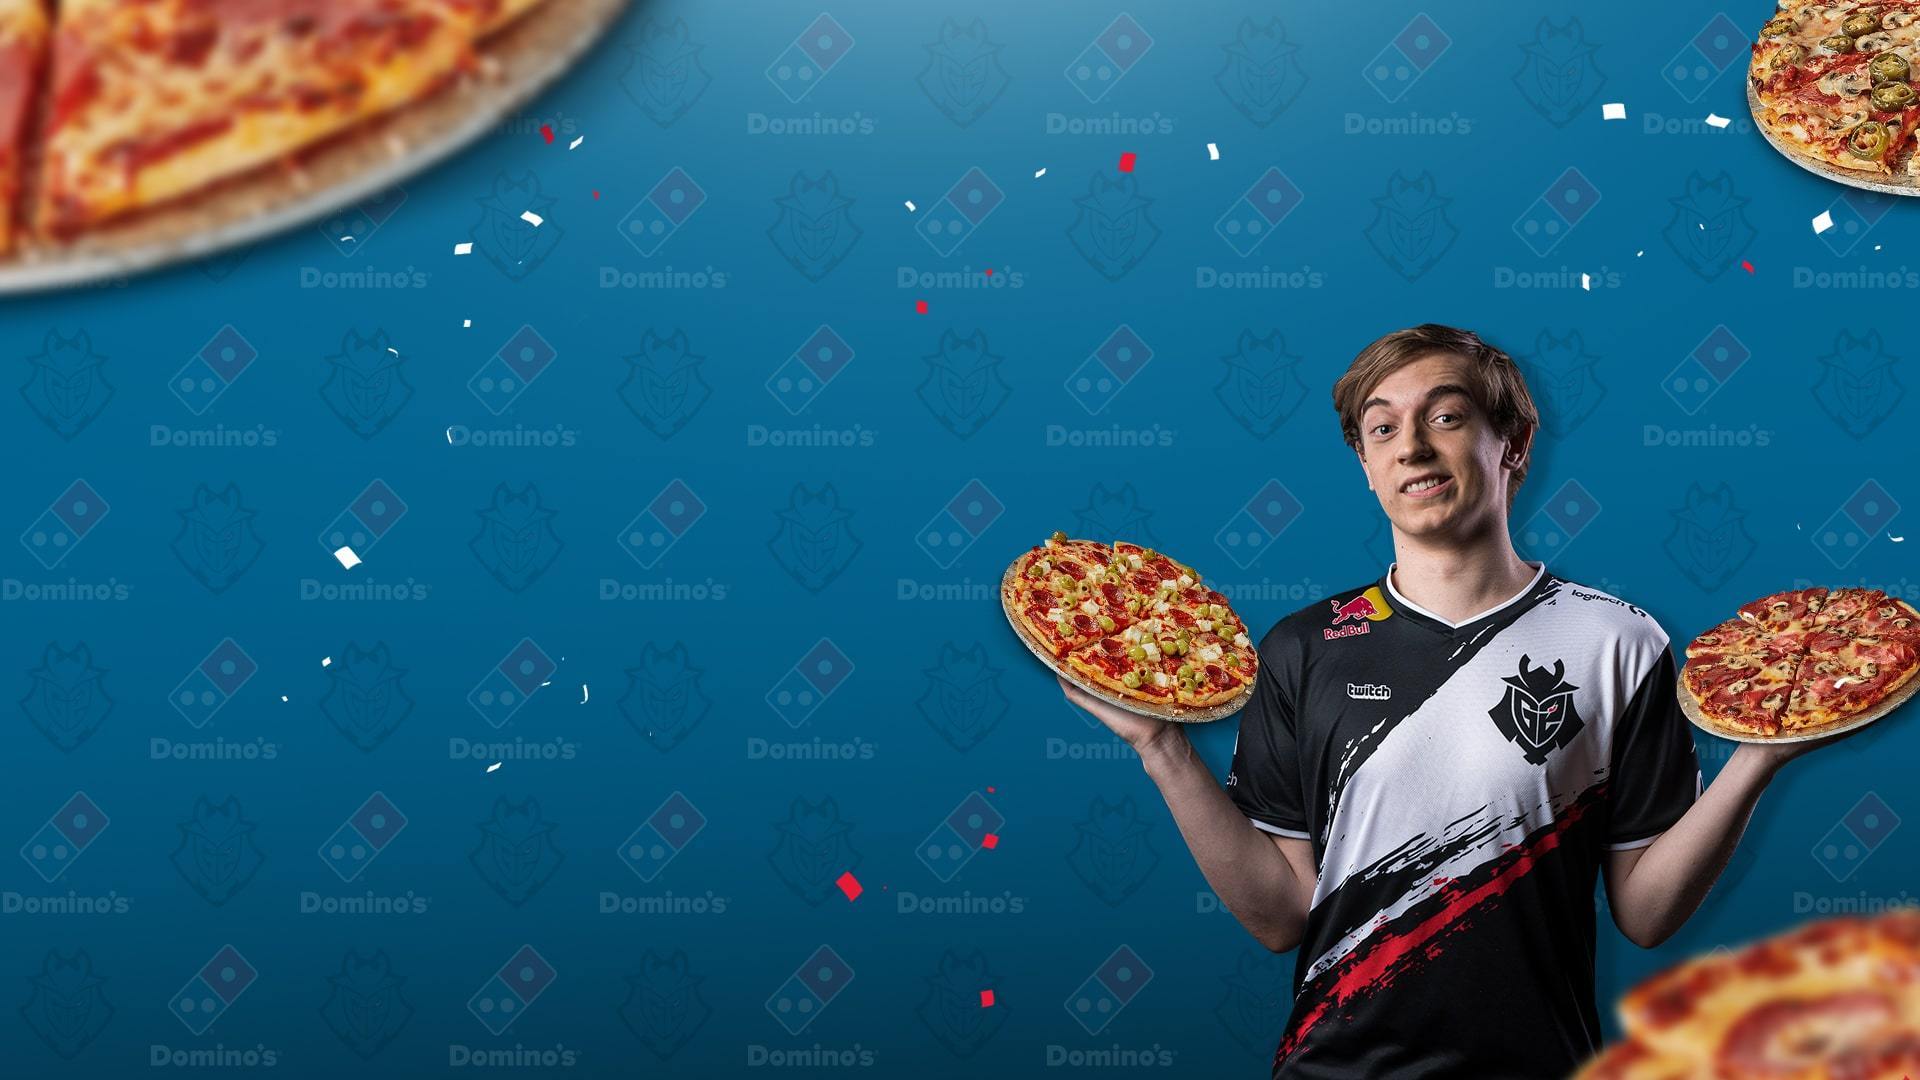 G2 Delivers with Domino's Germany!